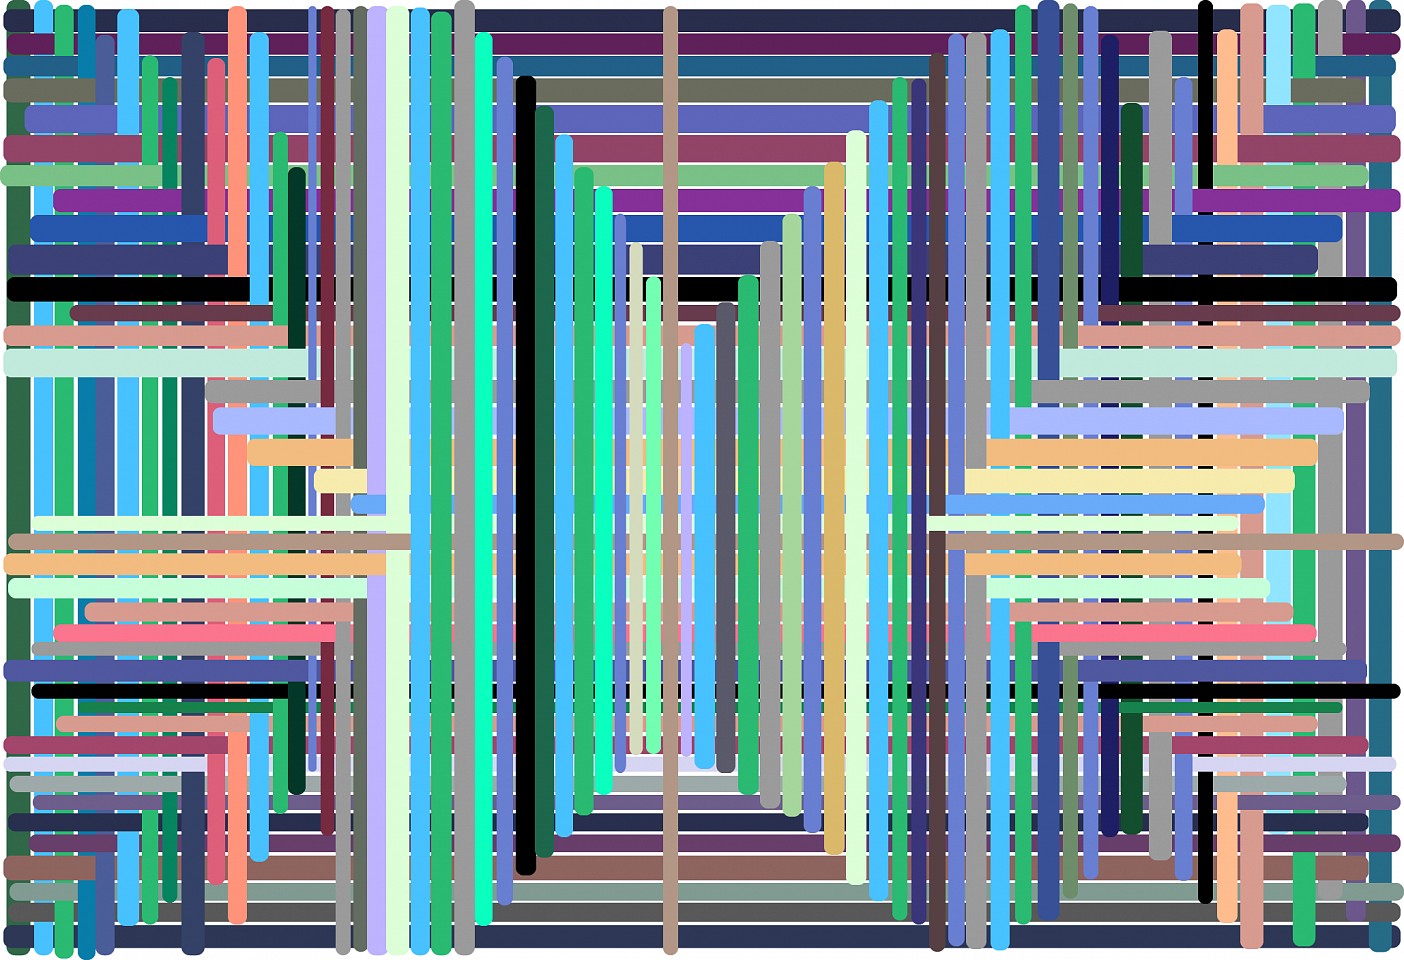 Dane Albert, Color Bars #10 Depth, 2023
Acrylic on canvas (Concept), 48 x 72 in. (121.9 x 182.9 cm)
Series of colored lines and shapes in multiple configurations
DA.2023.bars-010-depth